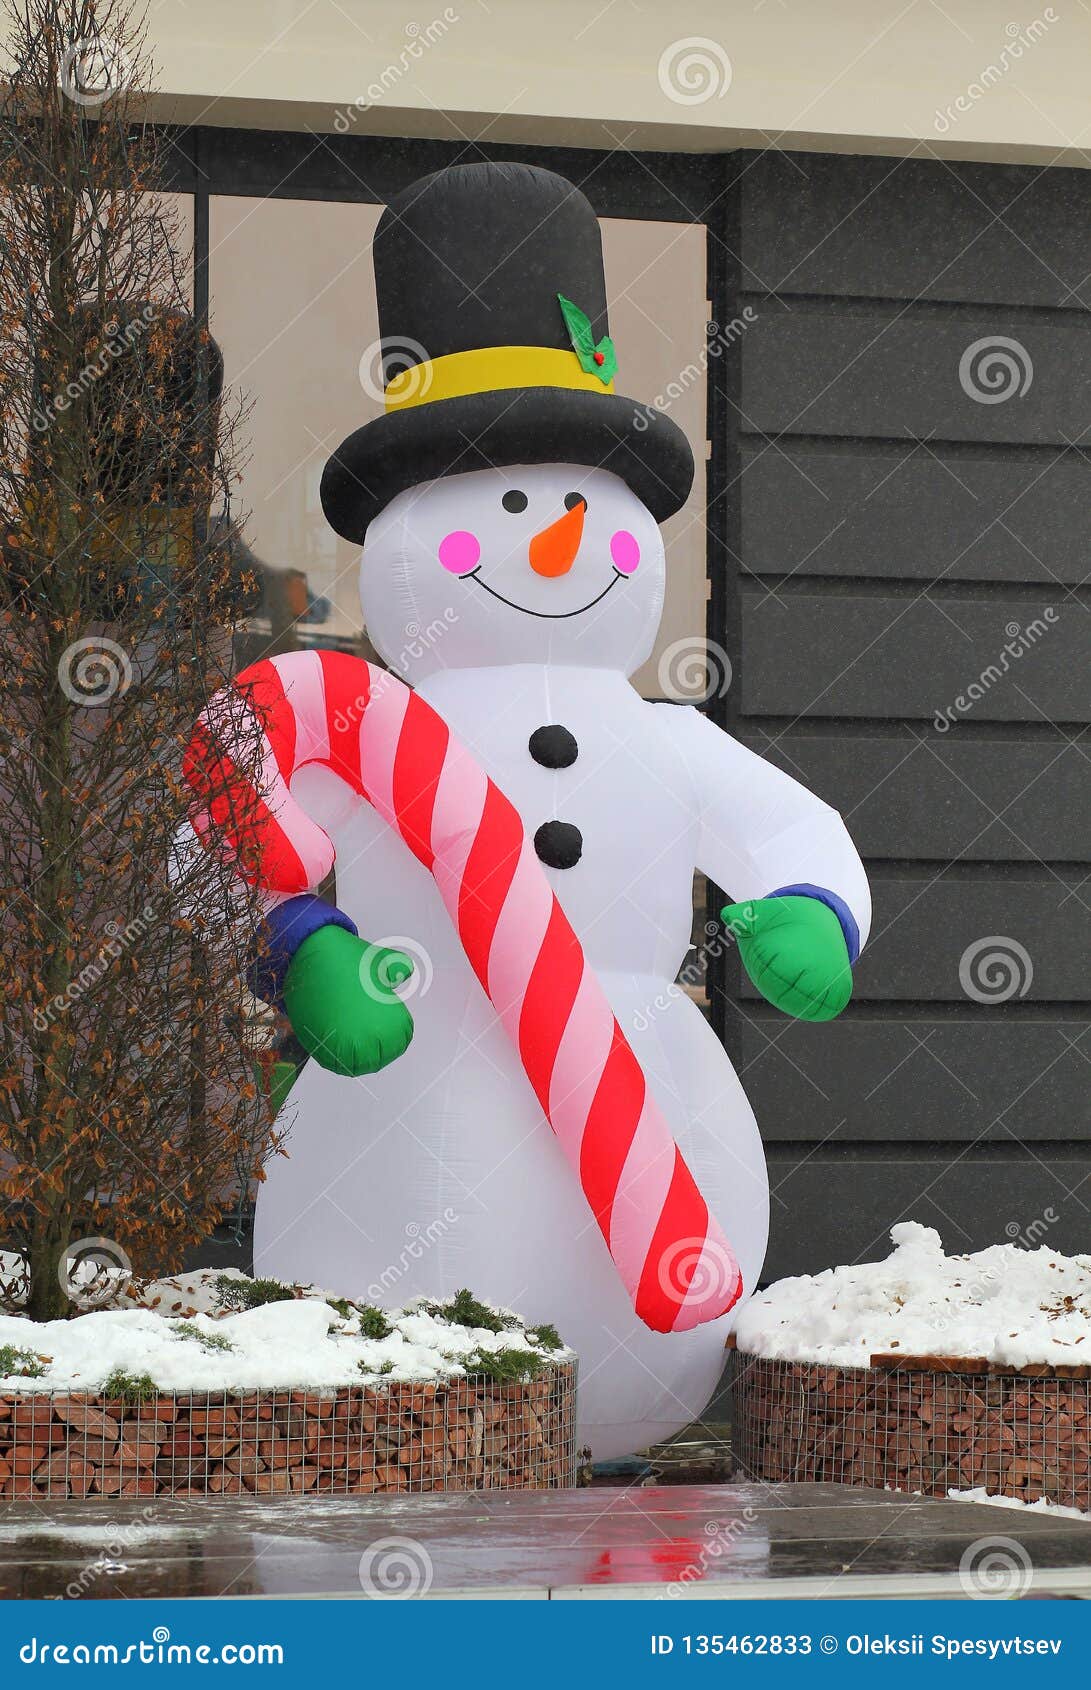 Giant Outdoor Inflated Snowman Christmas Decor Stock Image - Image of ...